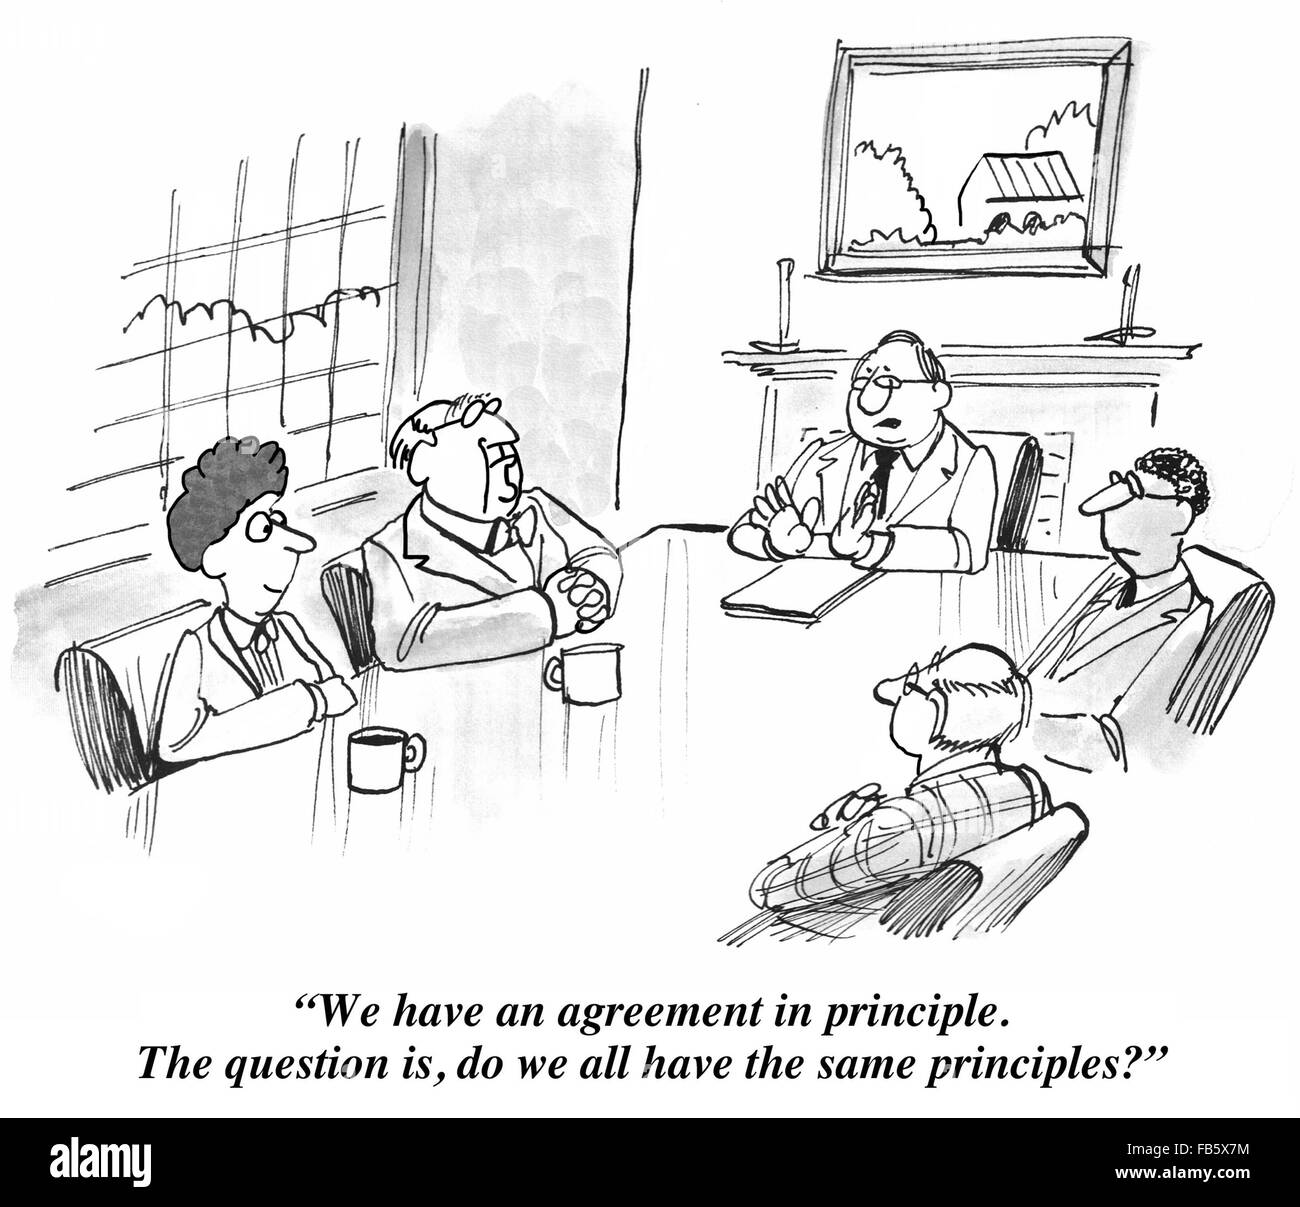 Business cartoon about negotiation.  They have an agreement in principle, but do they have the same principles. Stock Photo